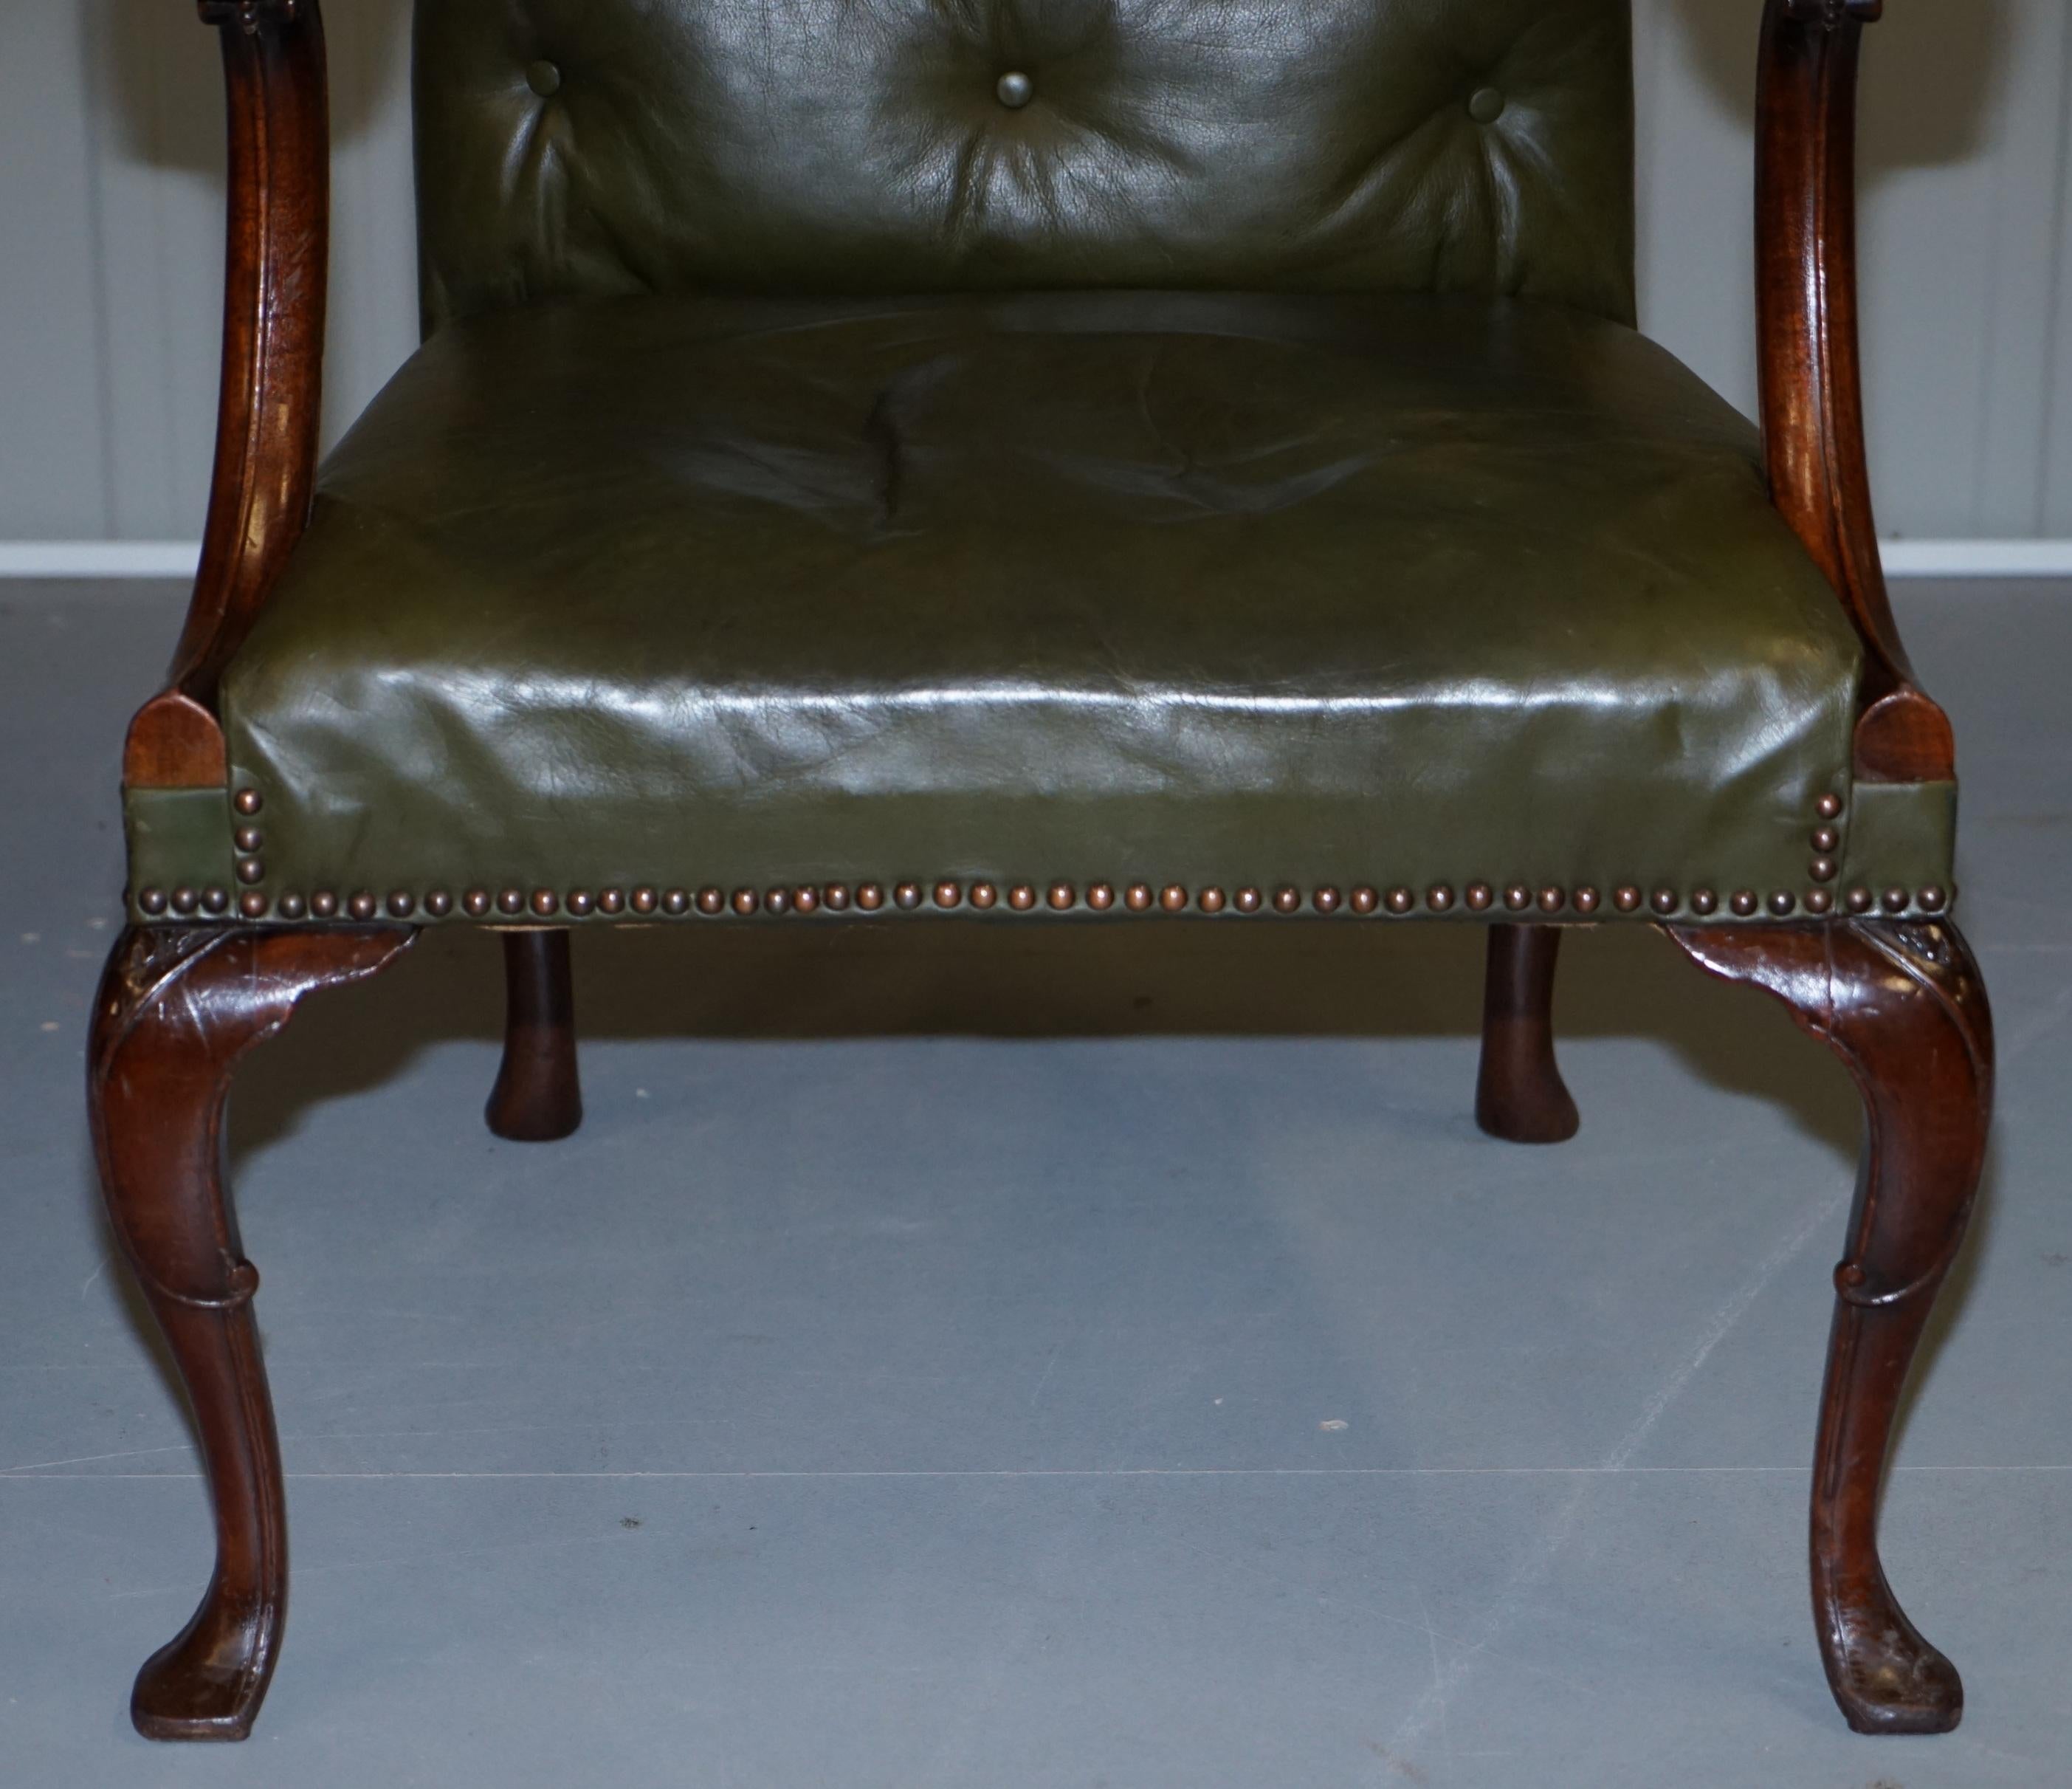 Gothic Revival Georgian Irish Chesterfield Leather Carver Armchair, circa 1800 For Sale 3